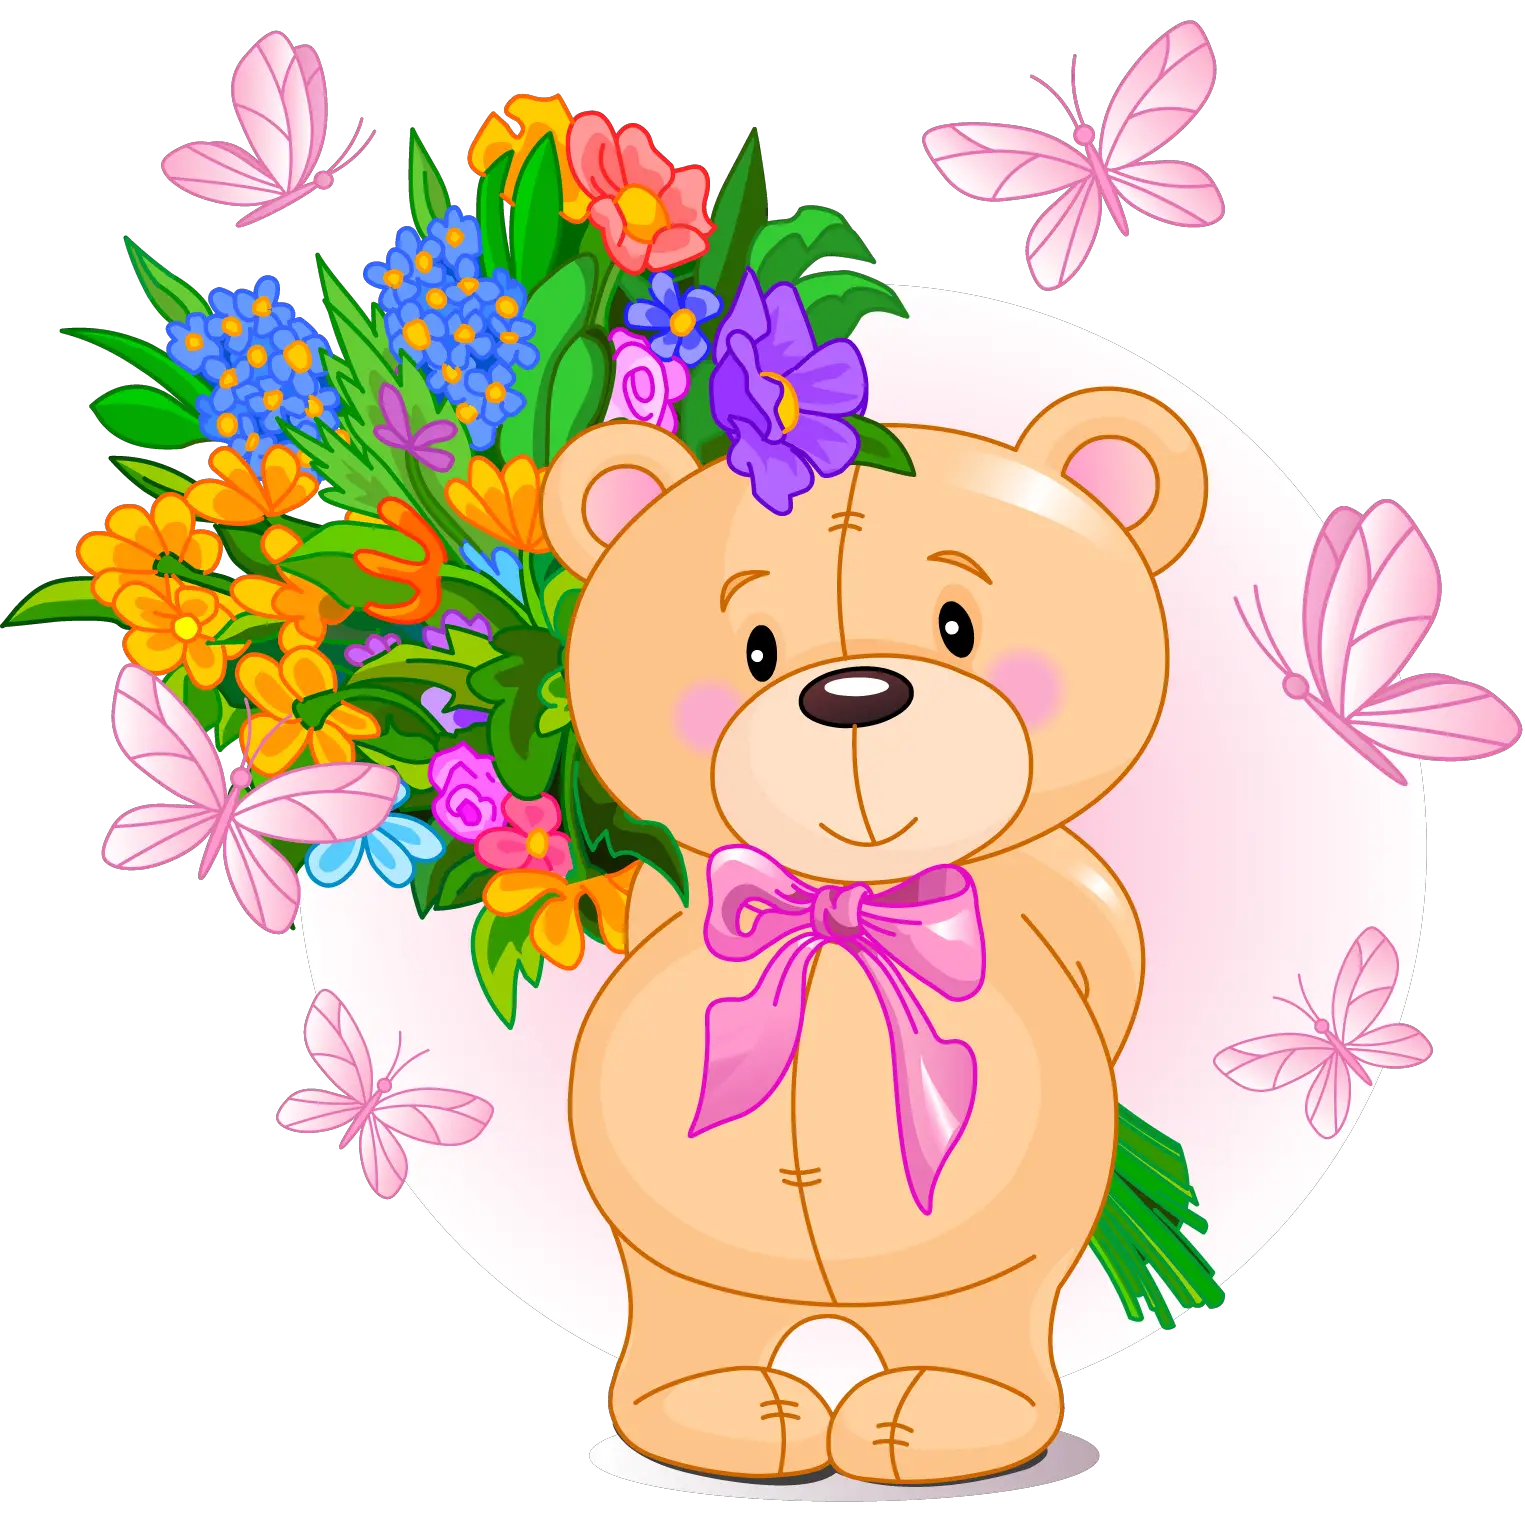 http://www.pintarcolorear.org/wp-content/uploads/2015/08/oso-con-flor.png